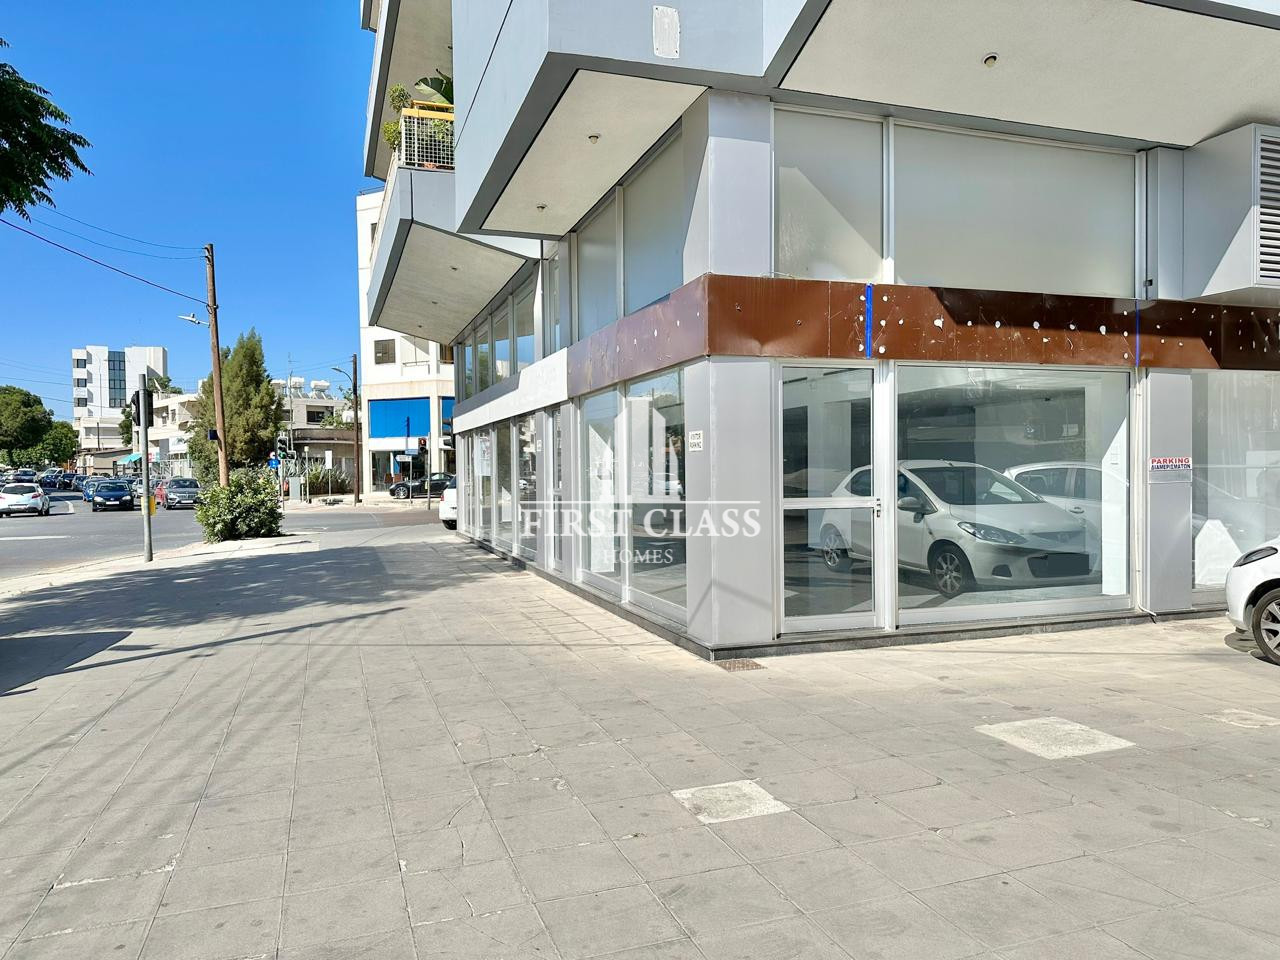 Property for Rent: Commercial (Shop) in Agios Antonios, Nicosia for Rent | Key Realtor Cyprus